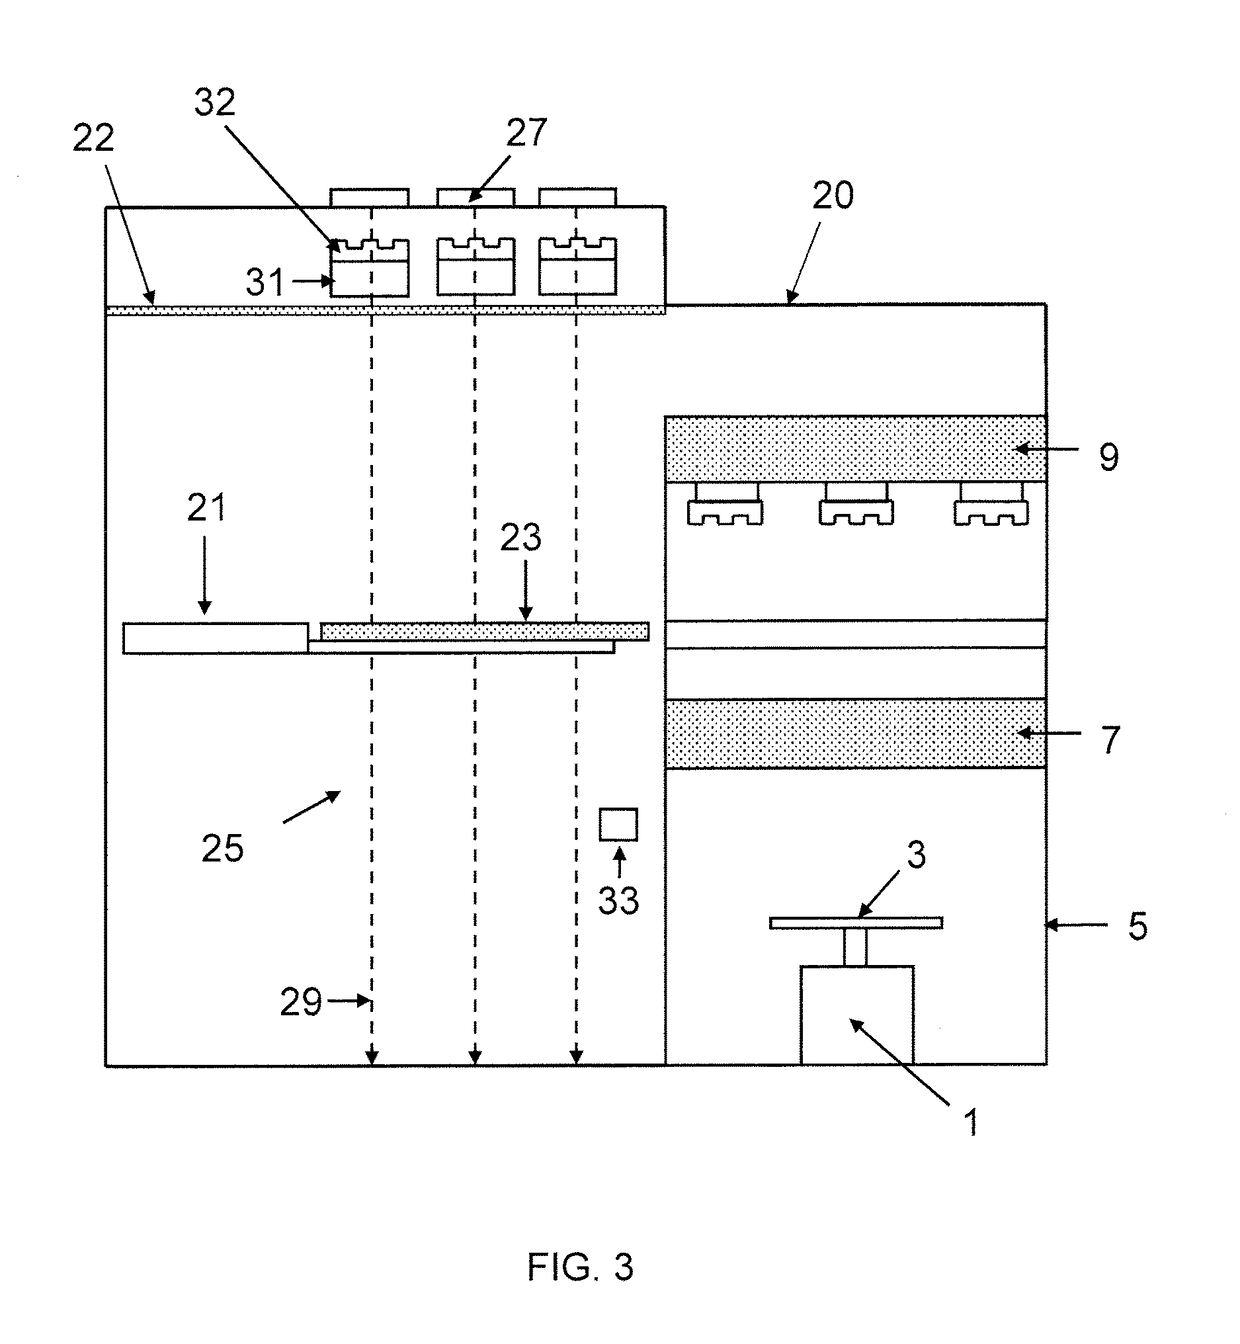 Semiconductor wafer processing methods and apparatus